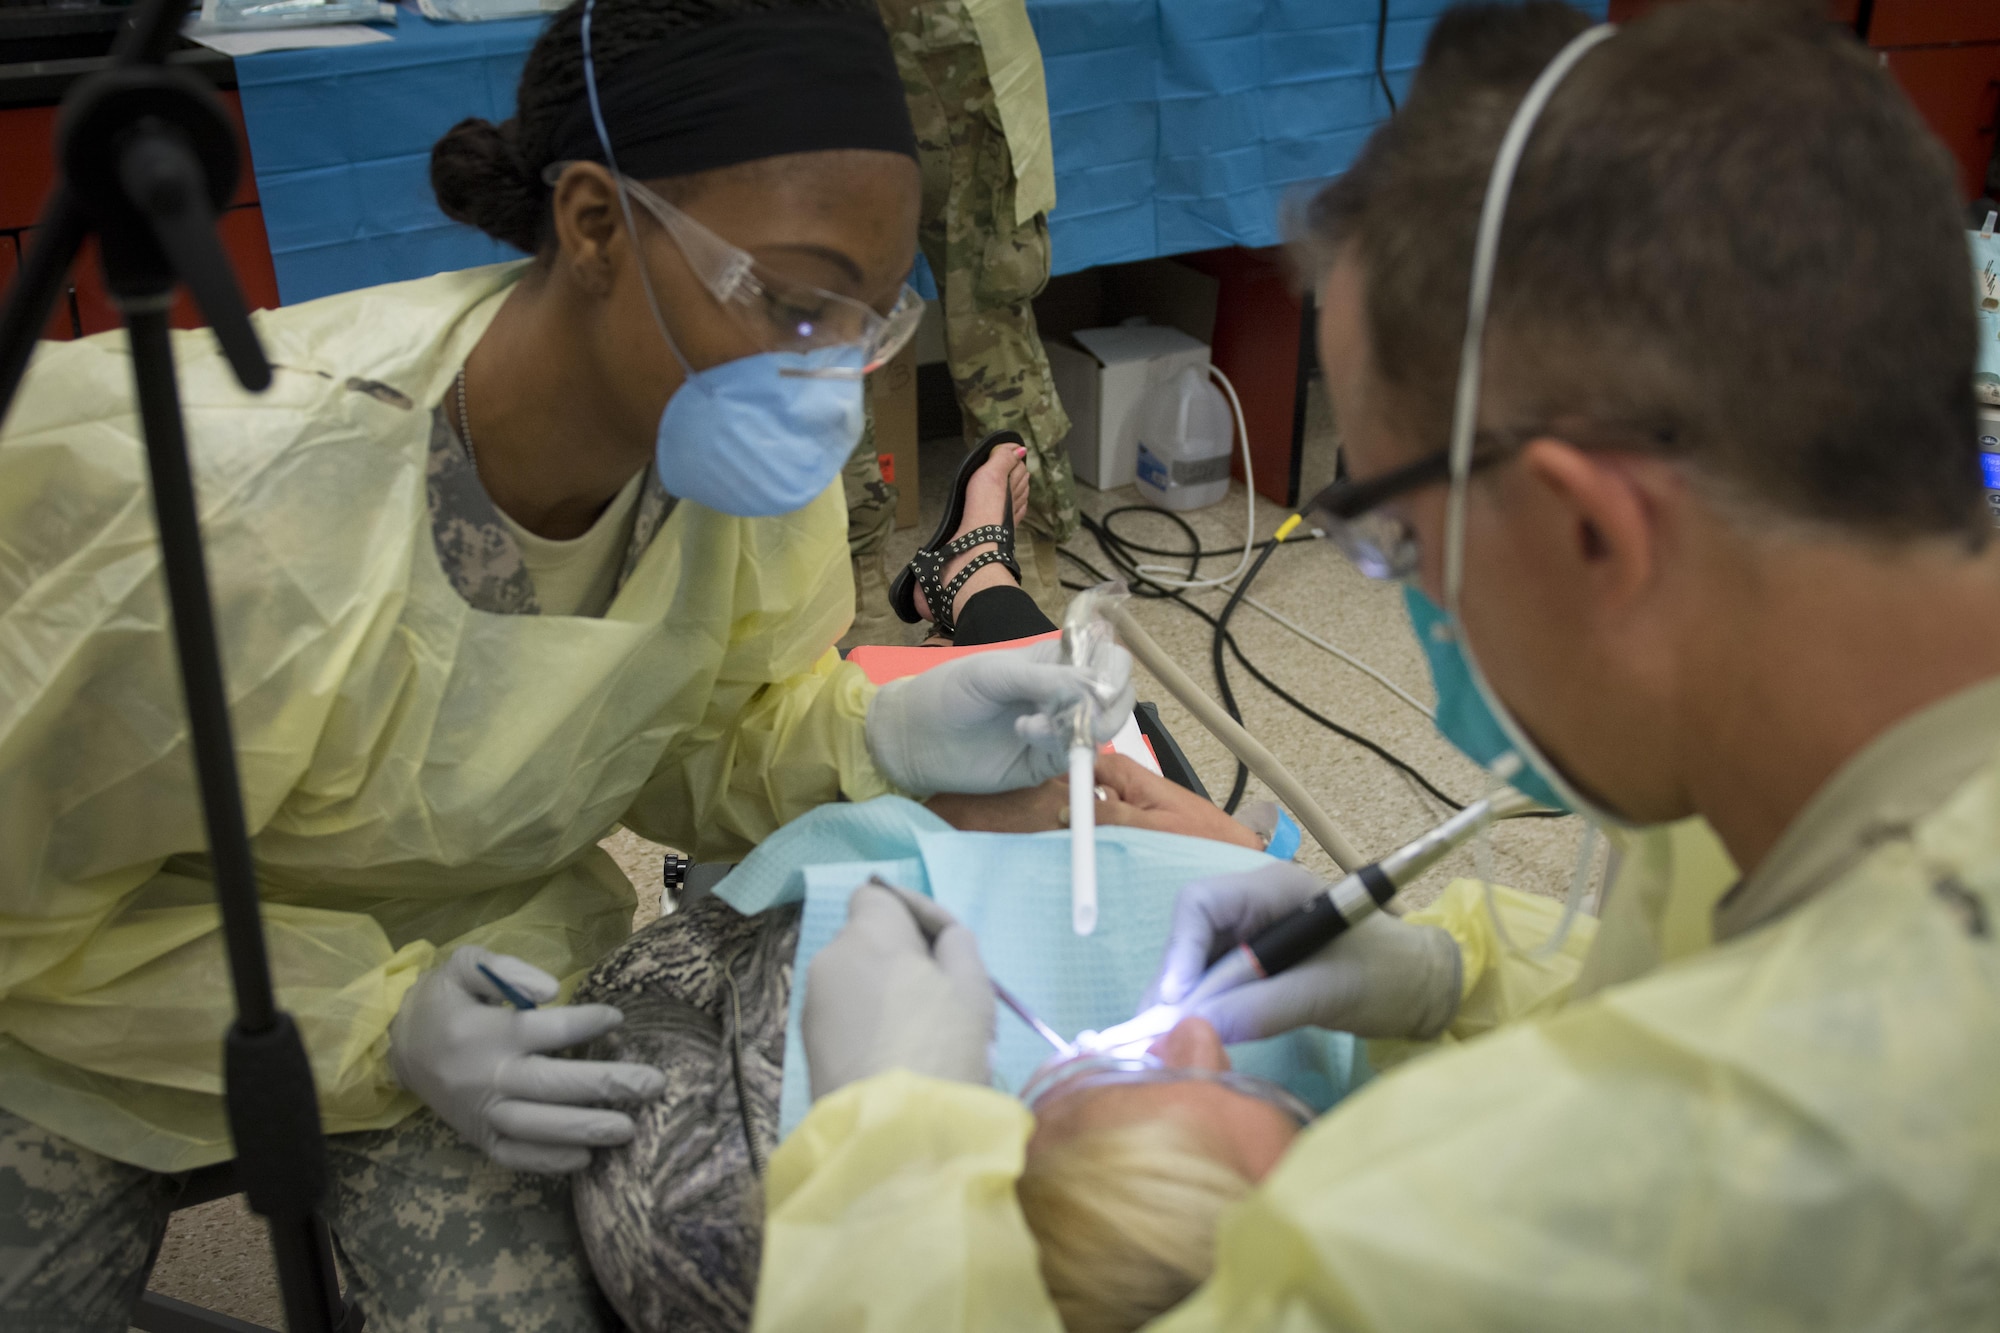 Air Force Lt. Col. Michael Strohecker (right), a dentist assigned to 145th Medical Group, North Carolina Air National Guard, provides a filing at Swain County High School during Smoky Mountain Medical Innovative Readiness Training in Bryson City, N.C., on Aug. 3, 2017.